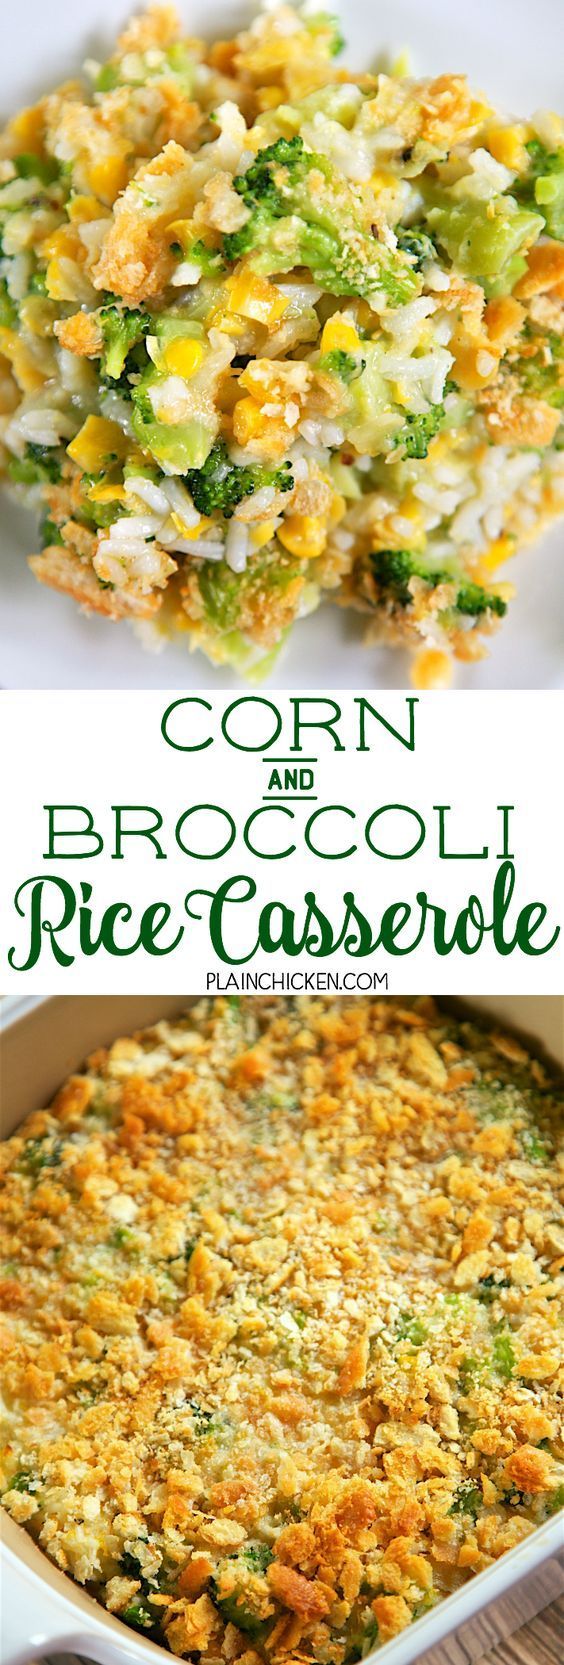 Corn and Broccoli Rice Casserole - so simple and SO delicious! Everyone cleaned their plates - even our picky broccoli haters! Cooked rice, creamed corn, broccoli, onion and garlic topped with butter and crushed Ritz crackers. You might want to double the recipe for this quick side dish - this didn't last long in our house! -   20 vegetable recipes quick
 ideas